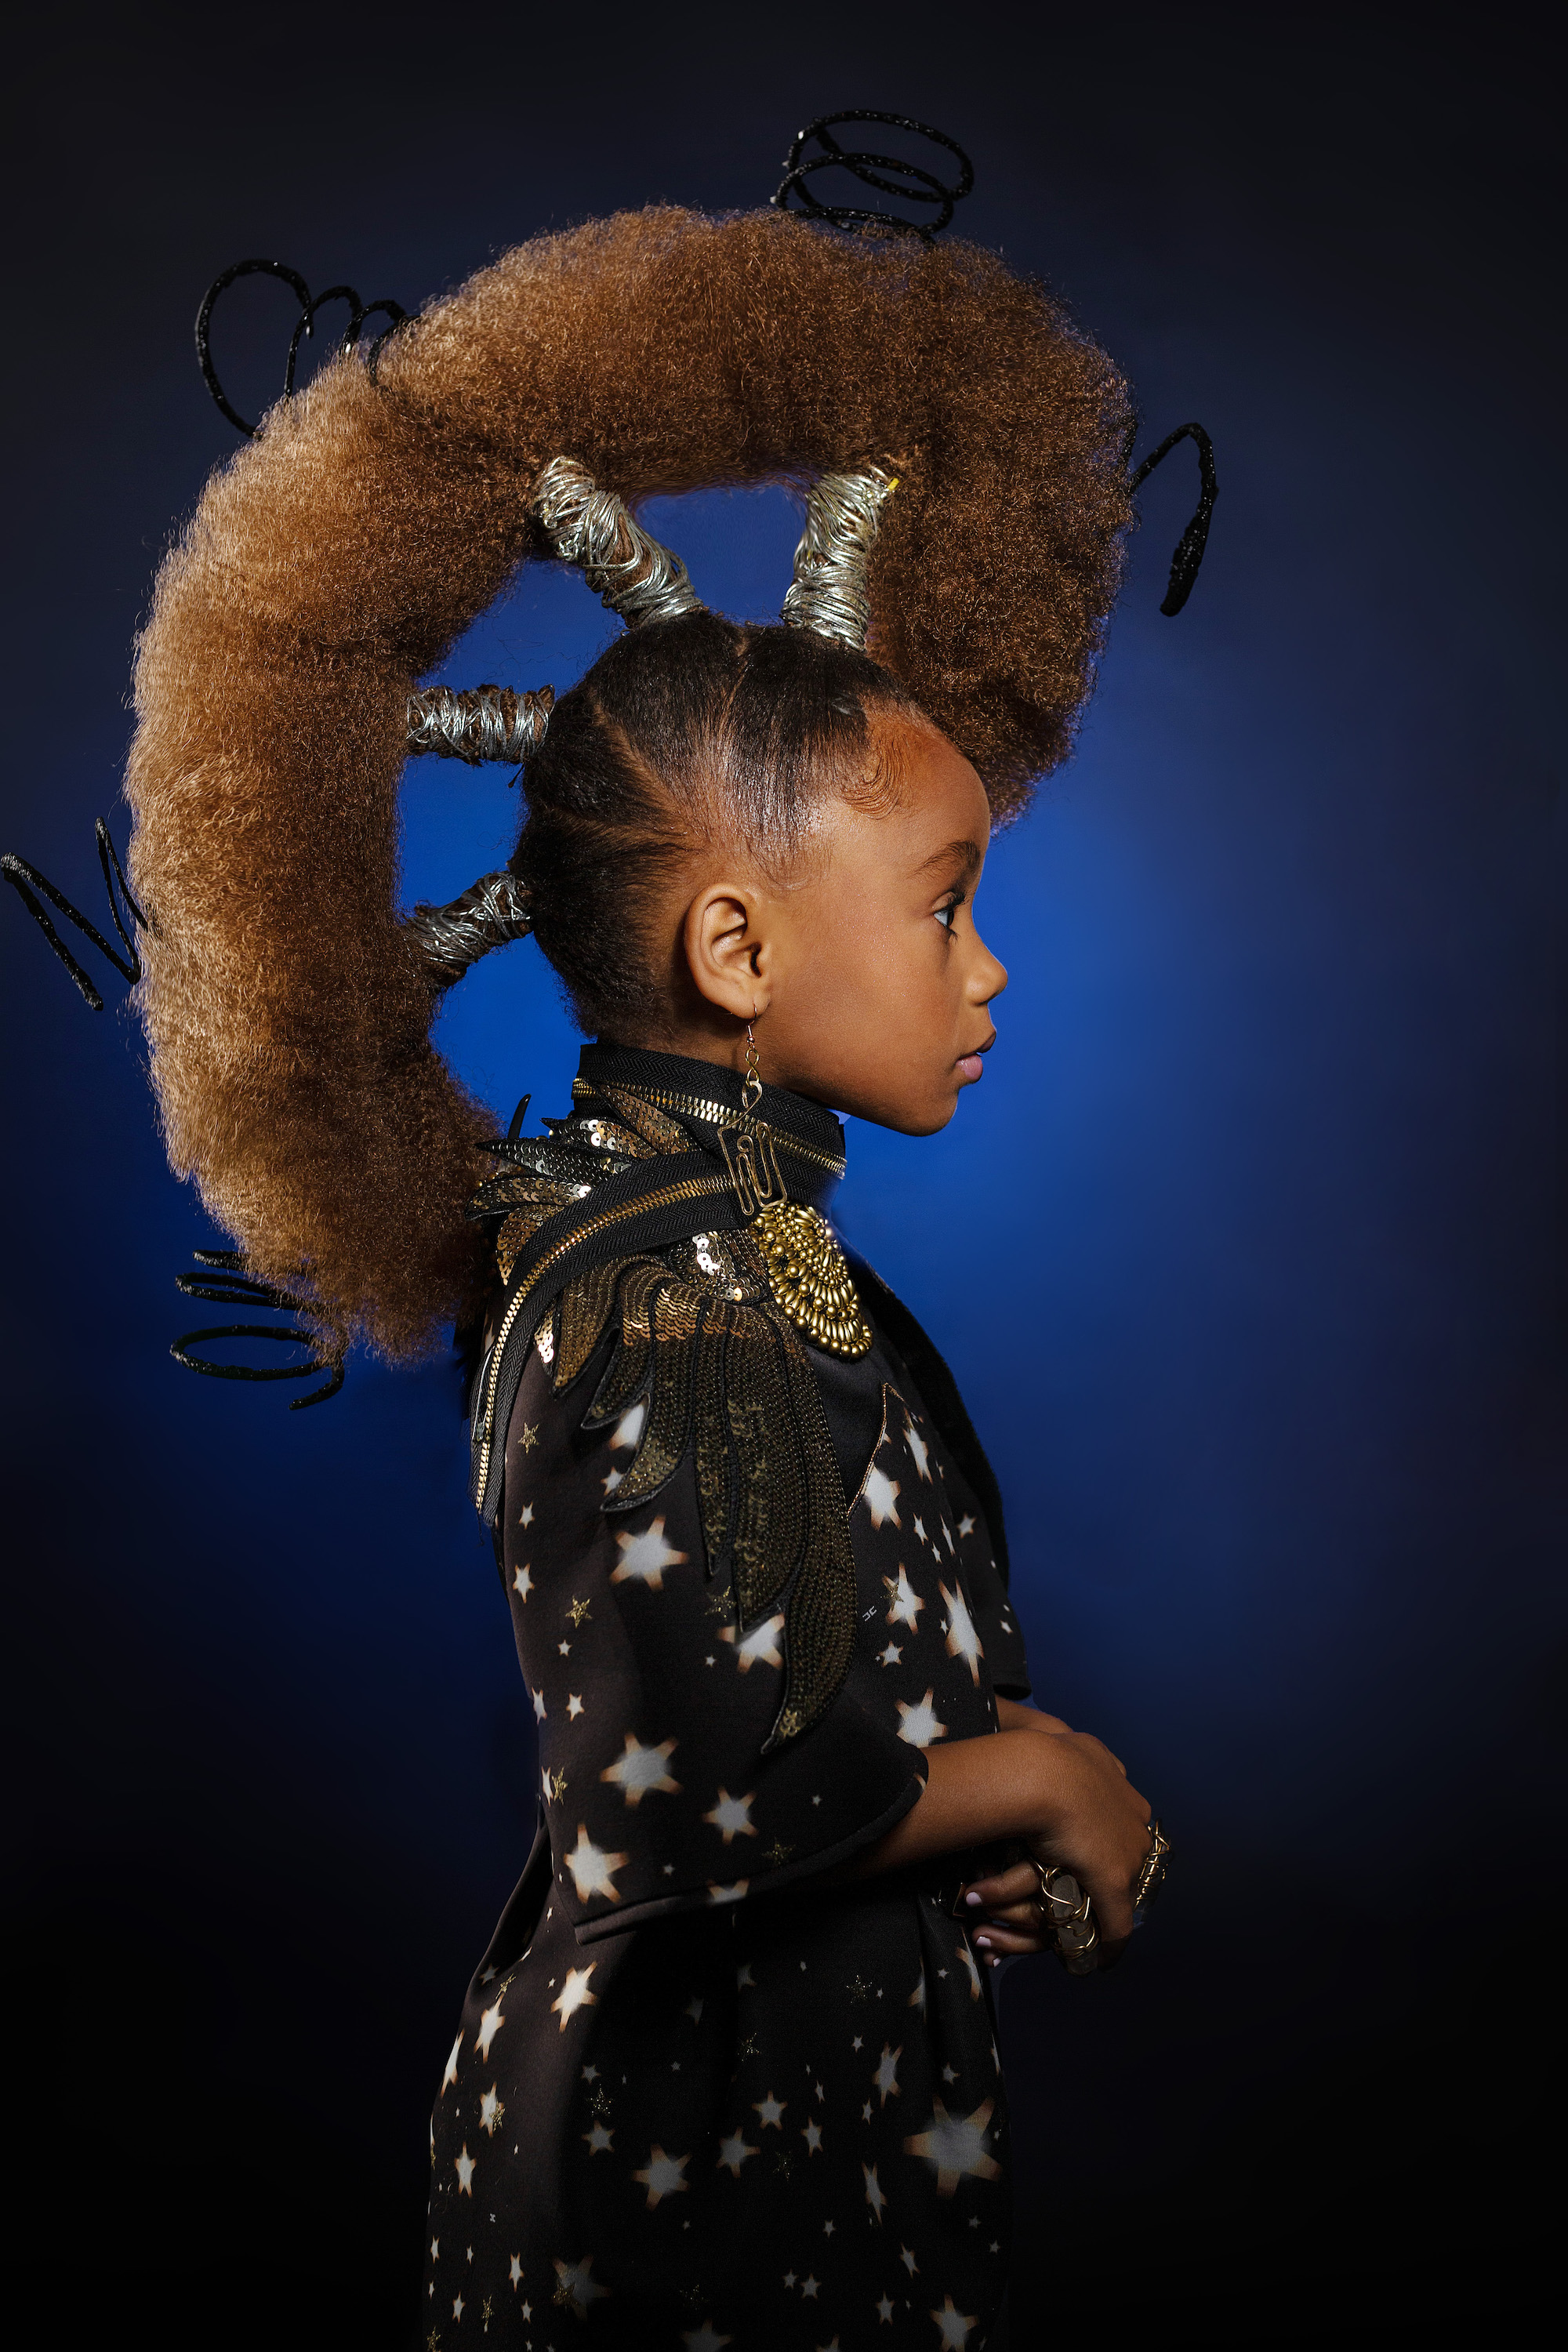 AfroArt Photo Series Challenges Beauty Standards with Young Black Models